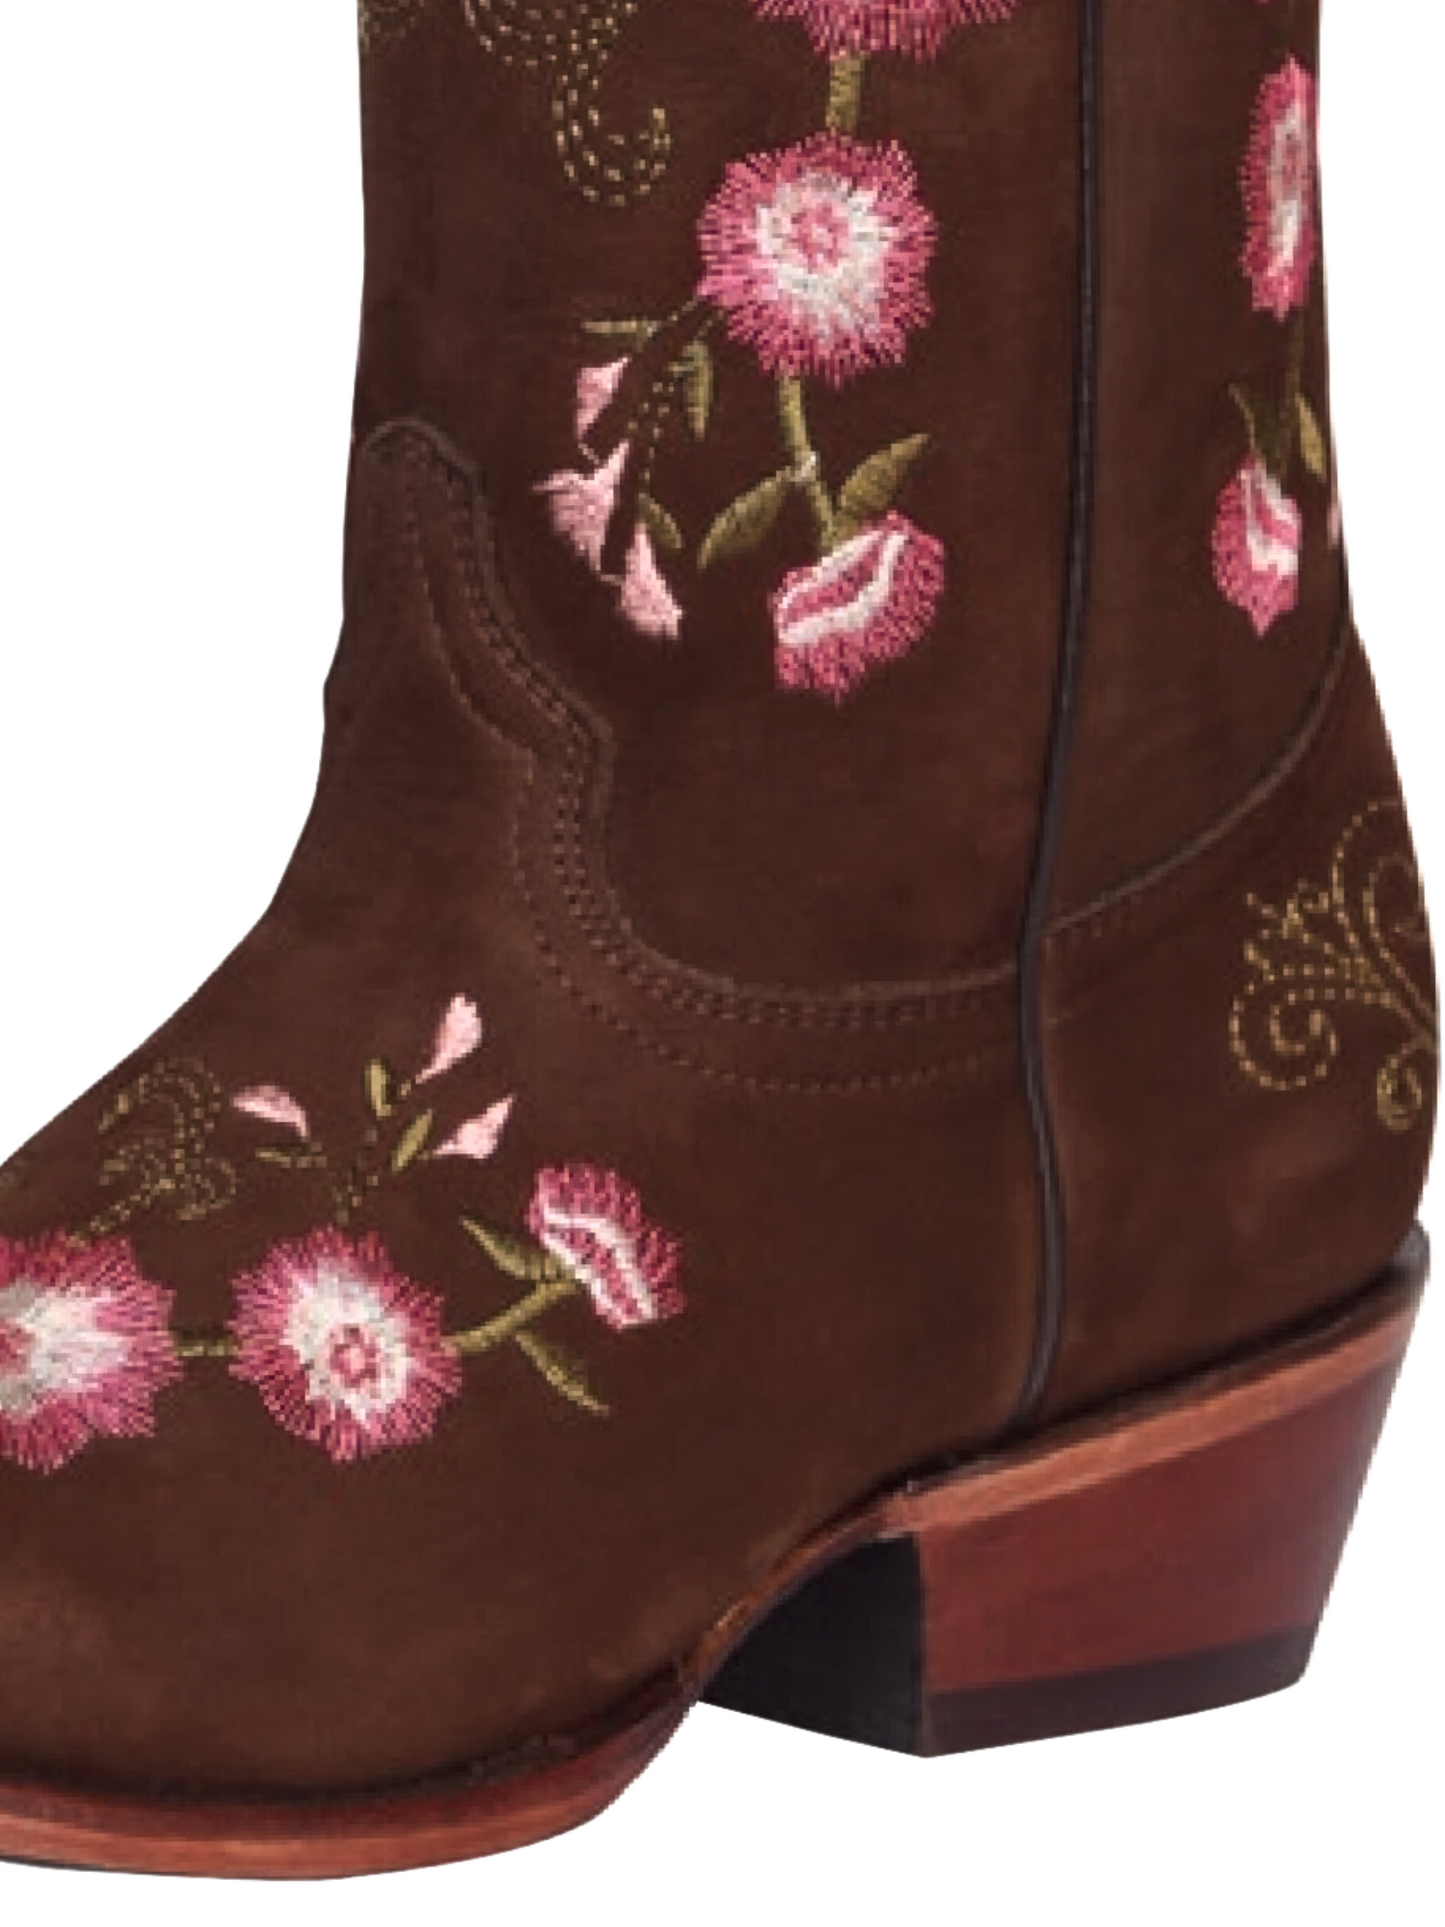 Rodeo Cowboy Boots with Nobuck Leather Flowers Embroidered Tube for Women 'El General' - ID: 41842